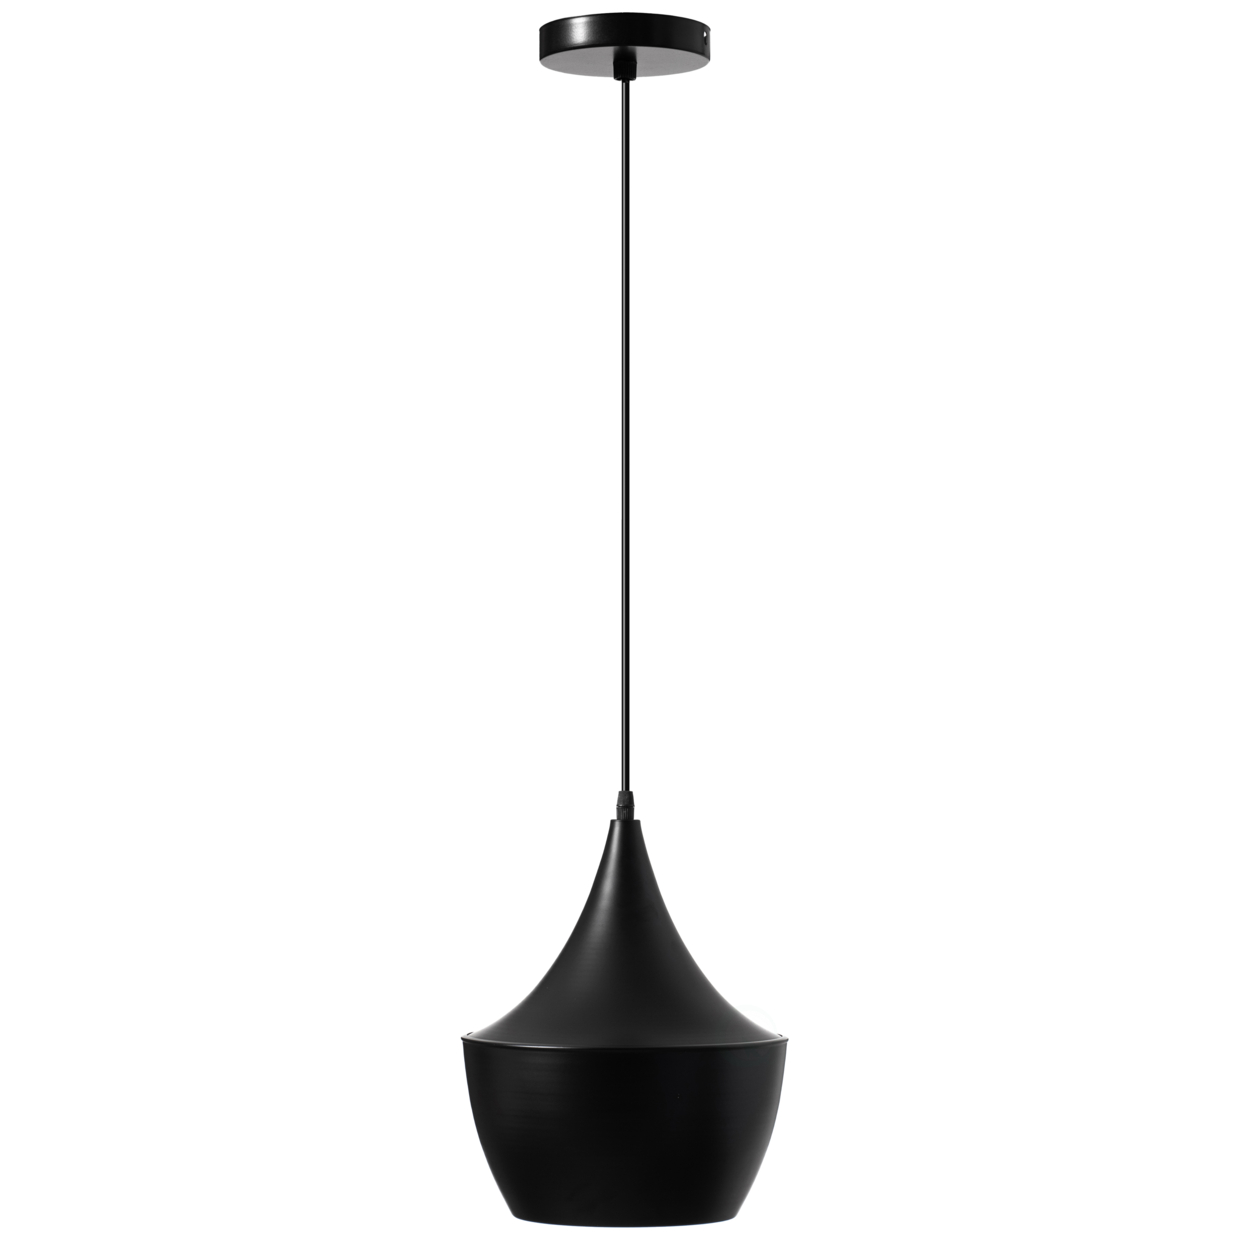 Quickway Imports Stylish Pendant Bar Ceiling Lights That Bring Elegance And Ambiance To Any Room In Your Home, Modern Style Lighting - Thick